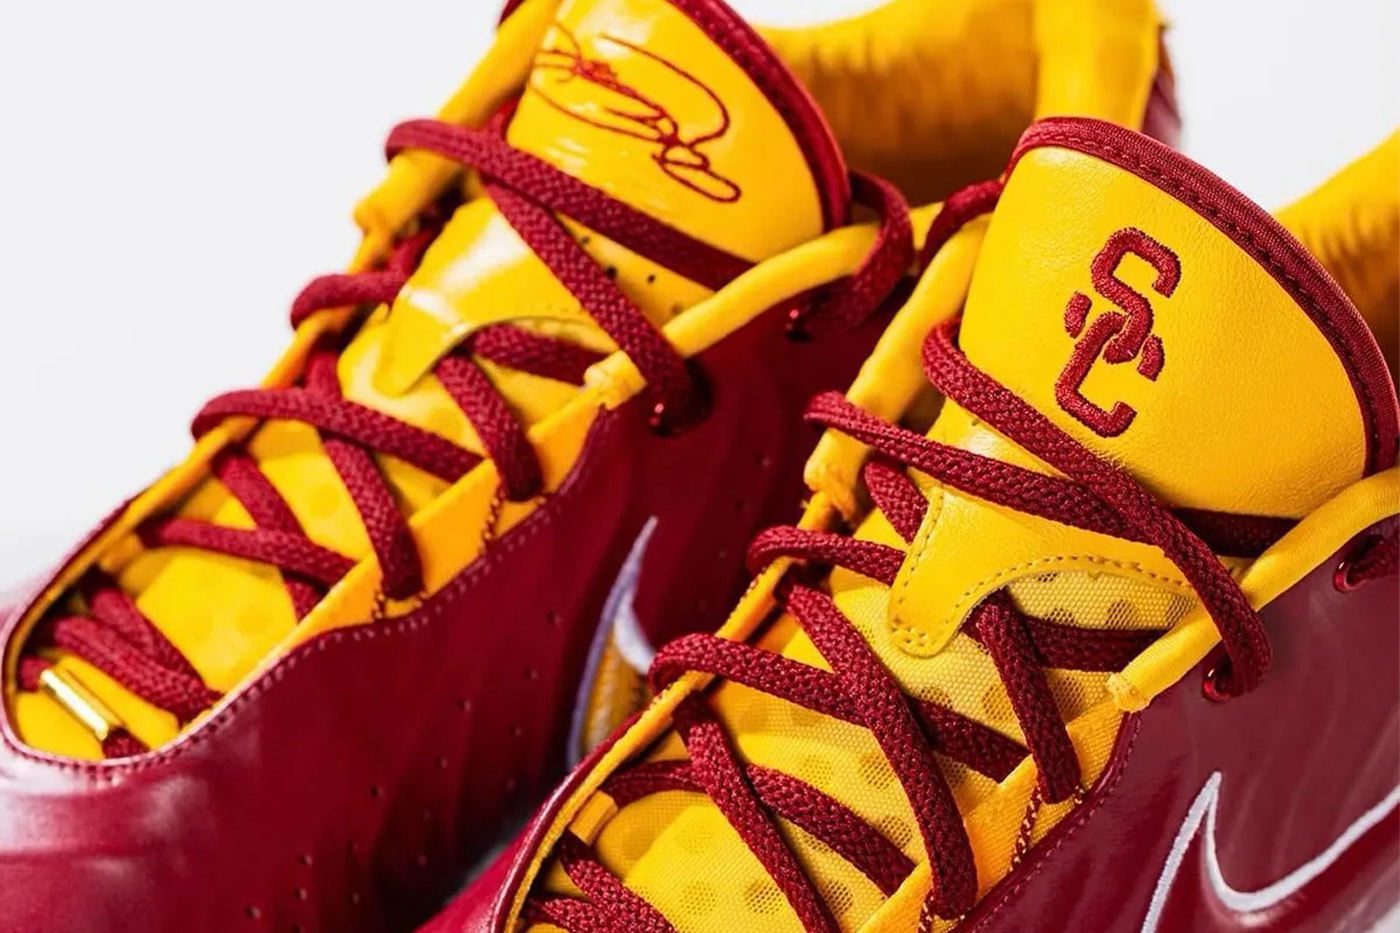 Bronny's USC Basketball Team Receives Two Custom Pairs of Nike LeBron 21 PEs lebron james king james beats red white gold yellow trojans university of southern california swoosh usc hoops